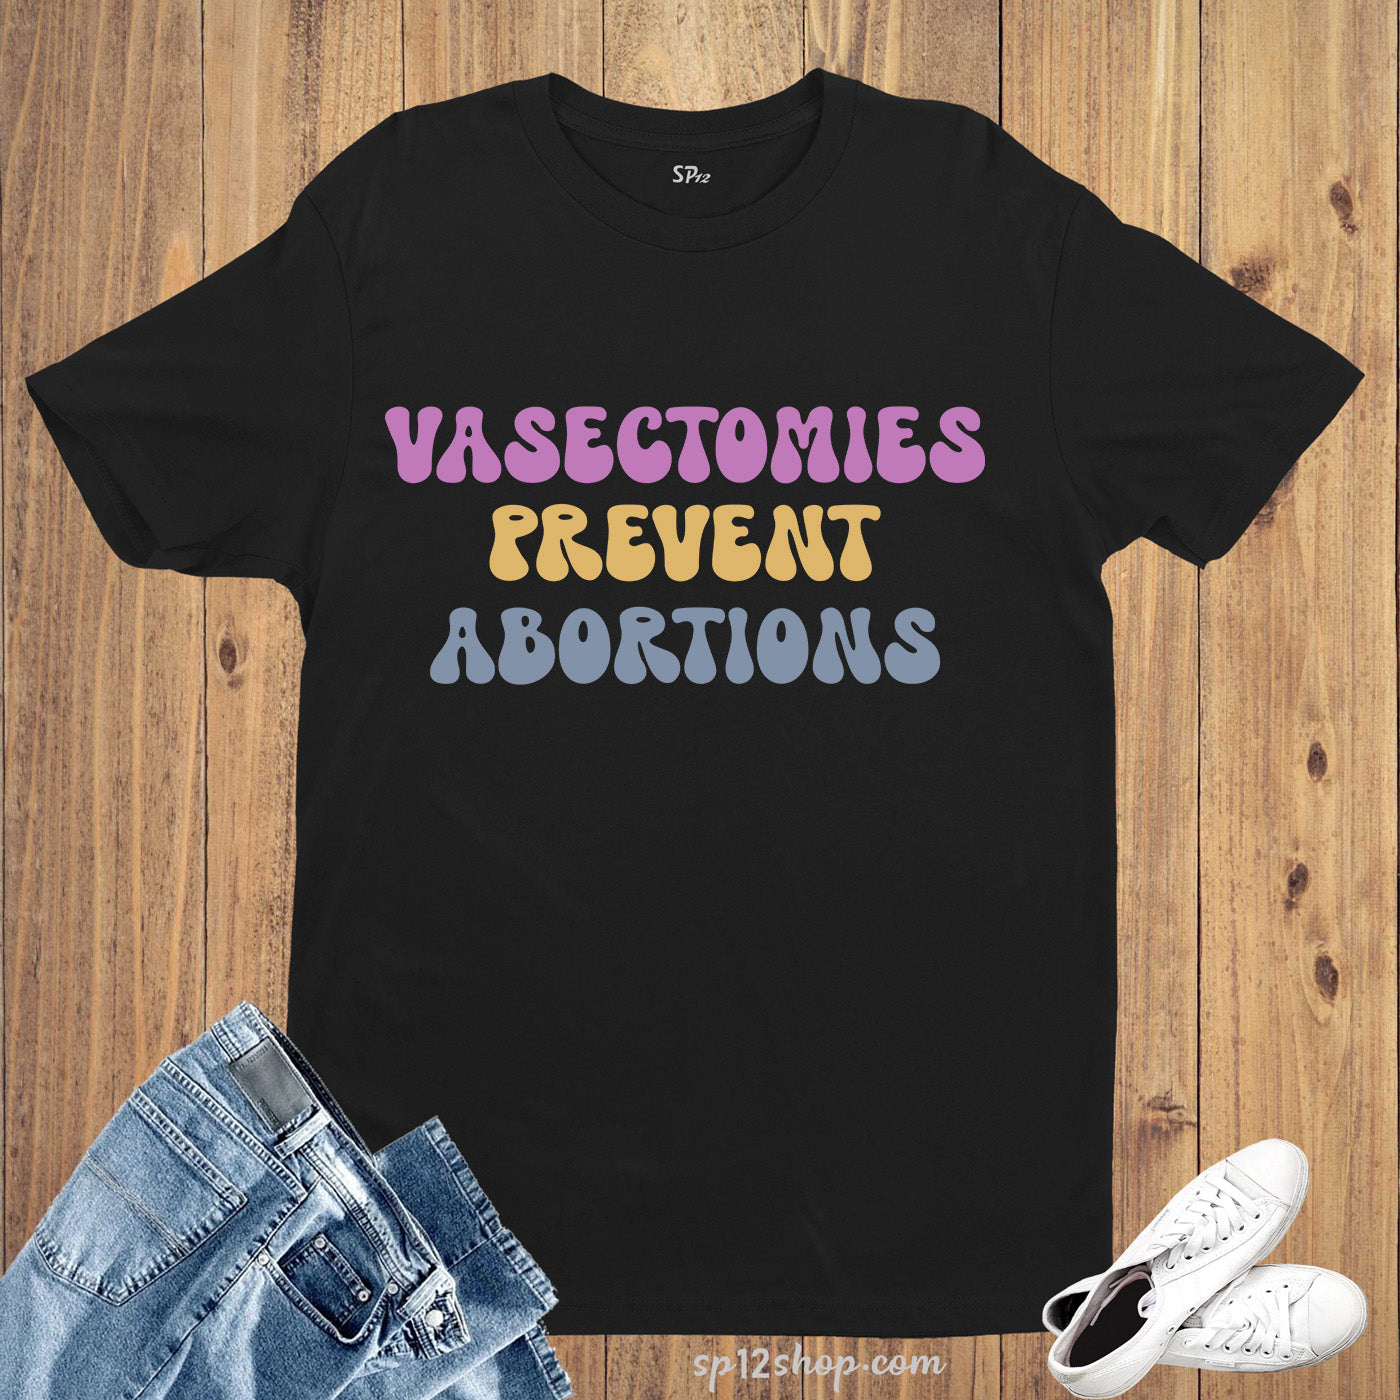 Vasectomies Prevent Abortions T-Shirt